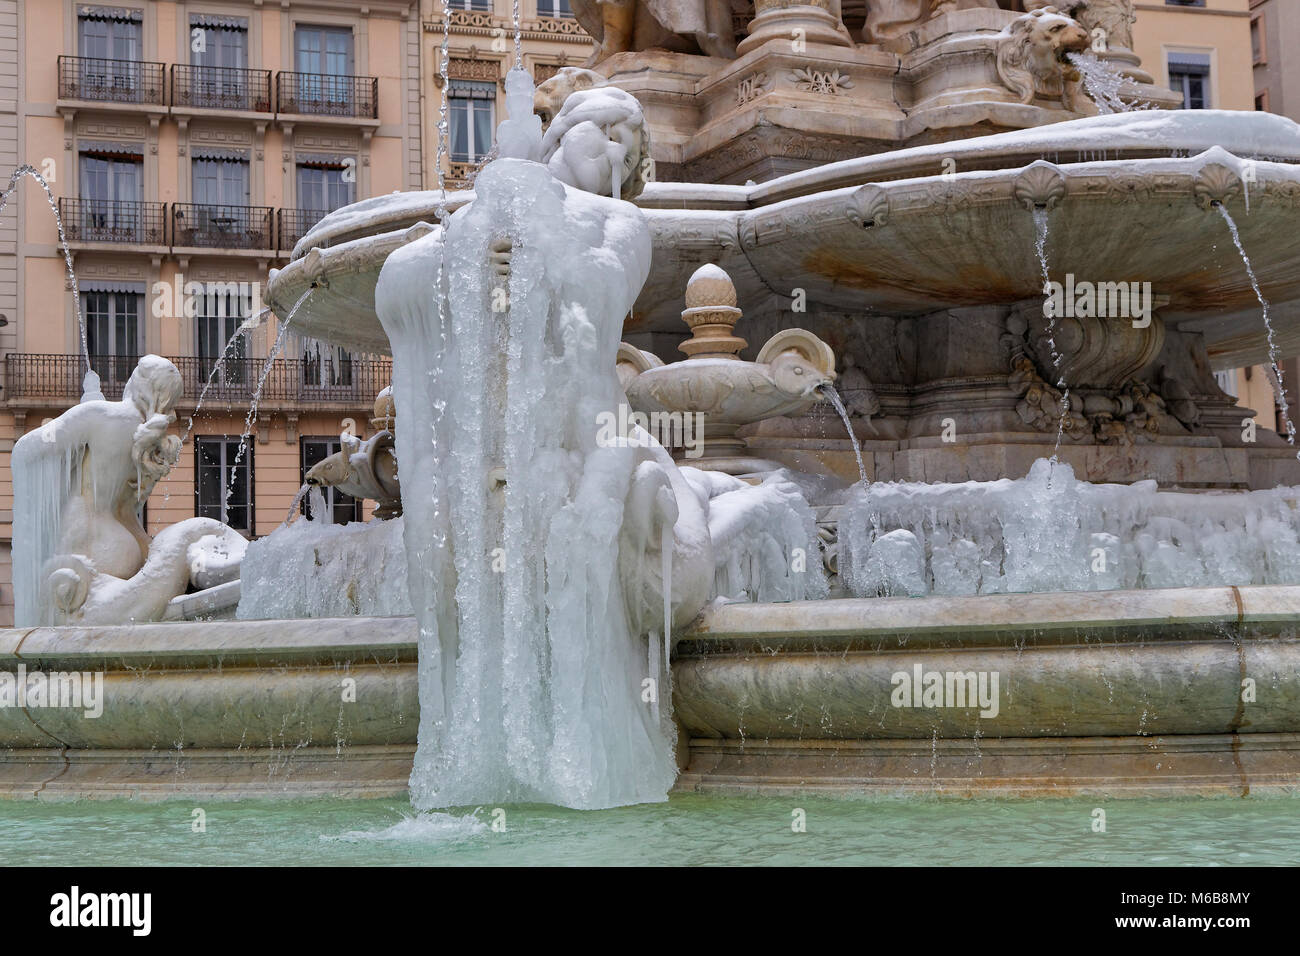 LYON, FRANCE, March 1, 2018 : Fountain of Place des Jacobins, as a cold spell rages in all Europe and the Capital of Gallia is under the snow. Stock Photo